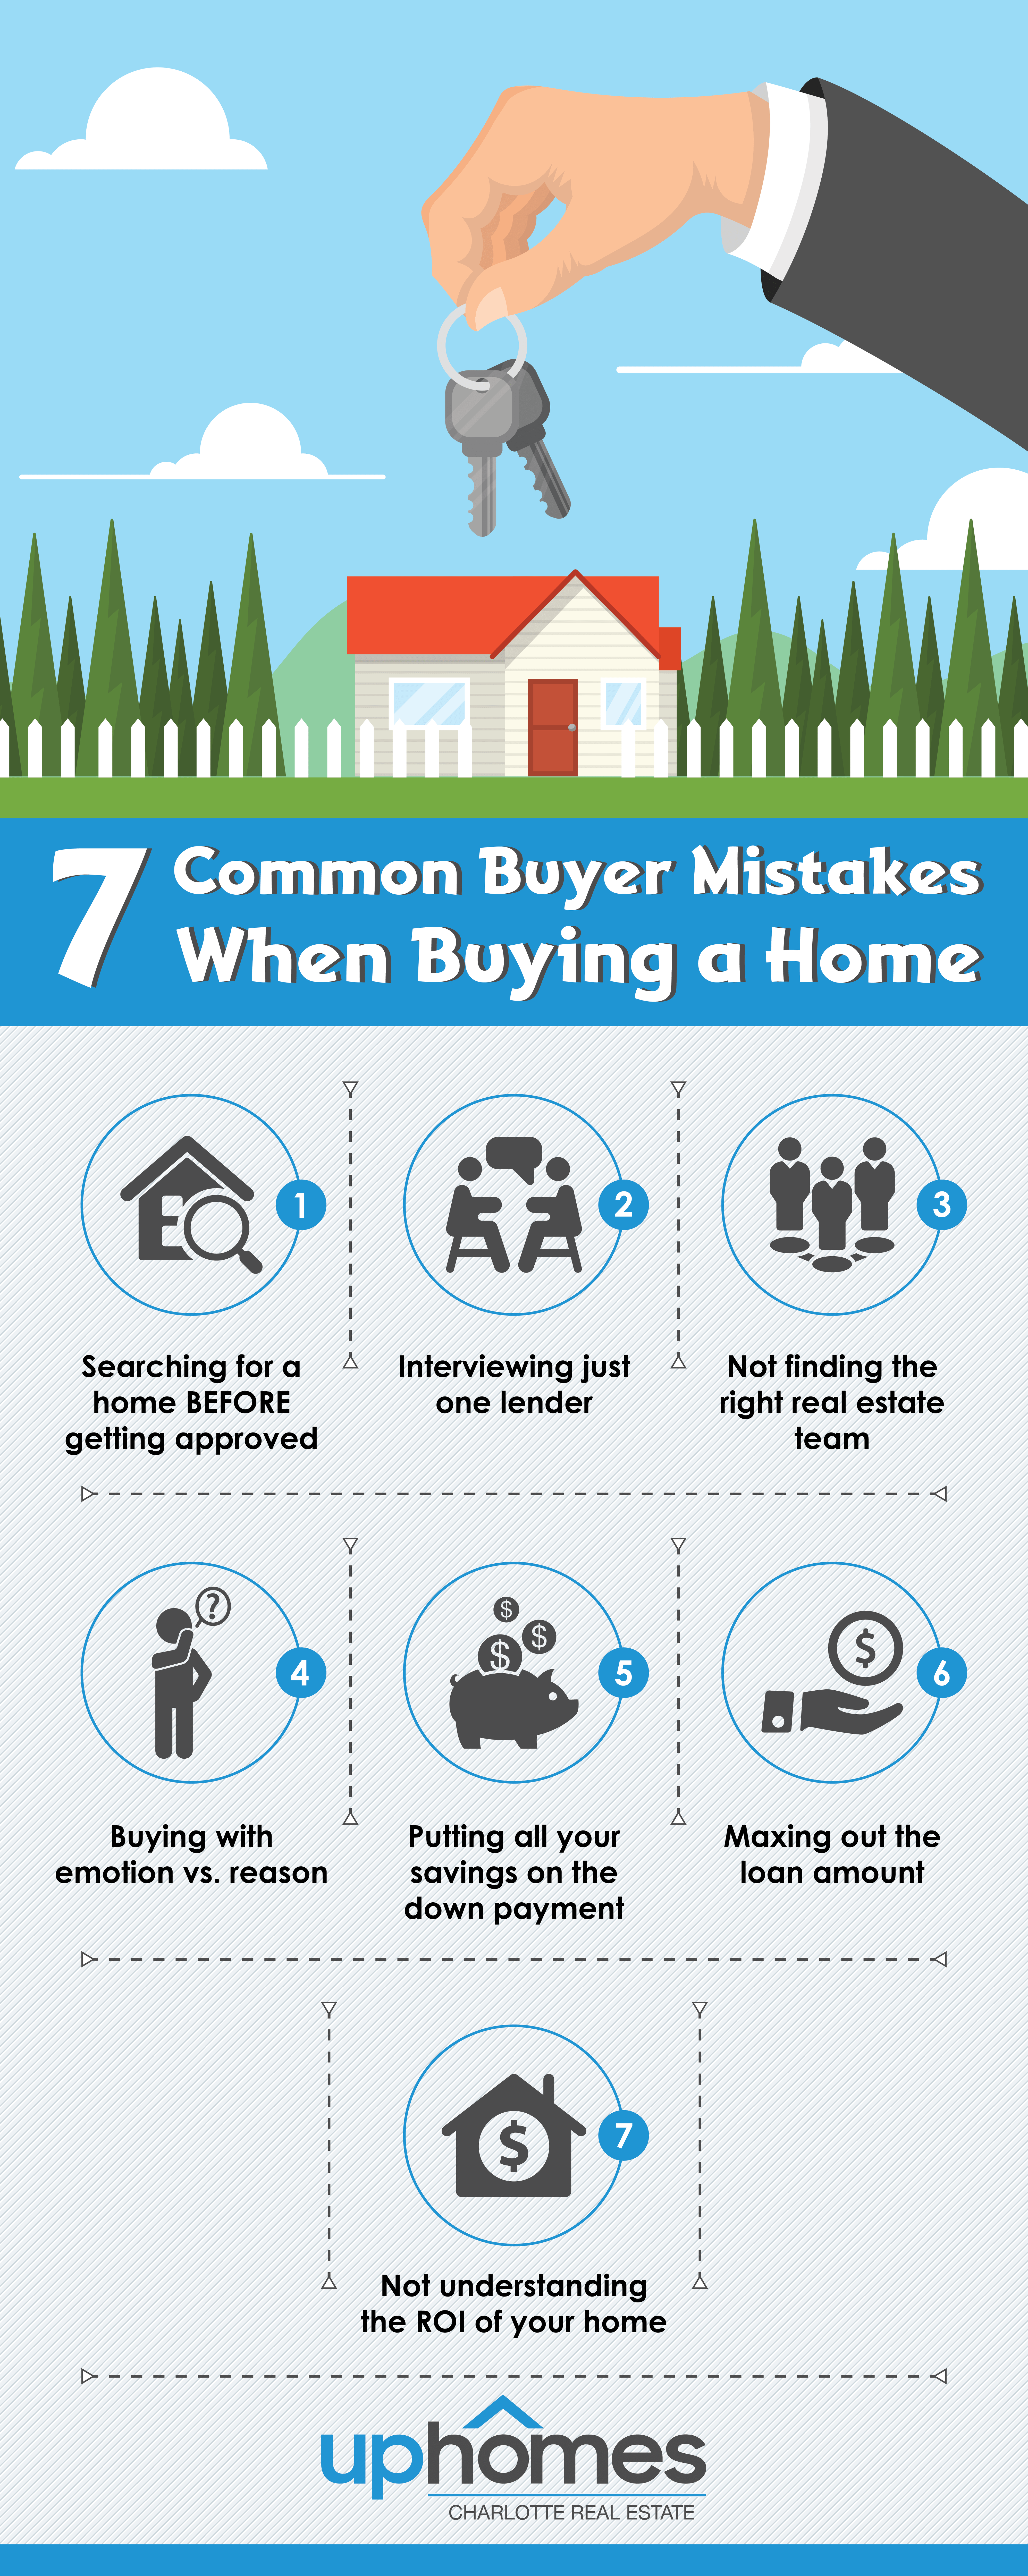 7 Common Mistakes Buyers Make When Buying a Home from Charlotte, NC Realtor - uphomes.com